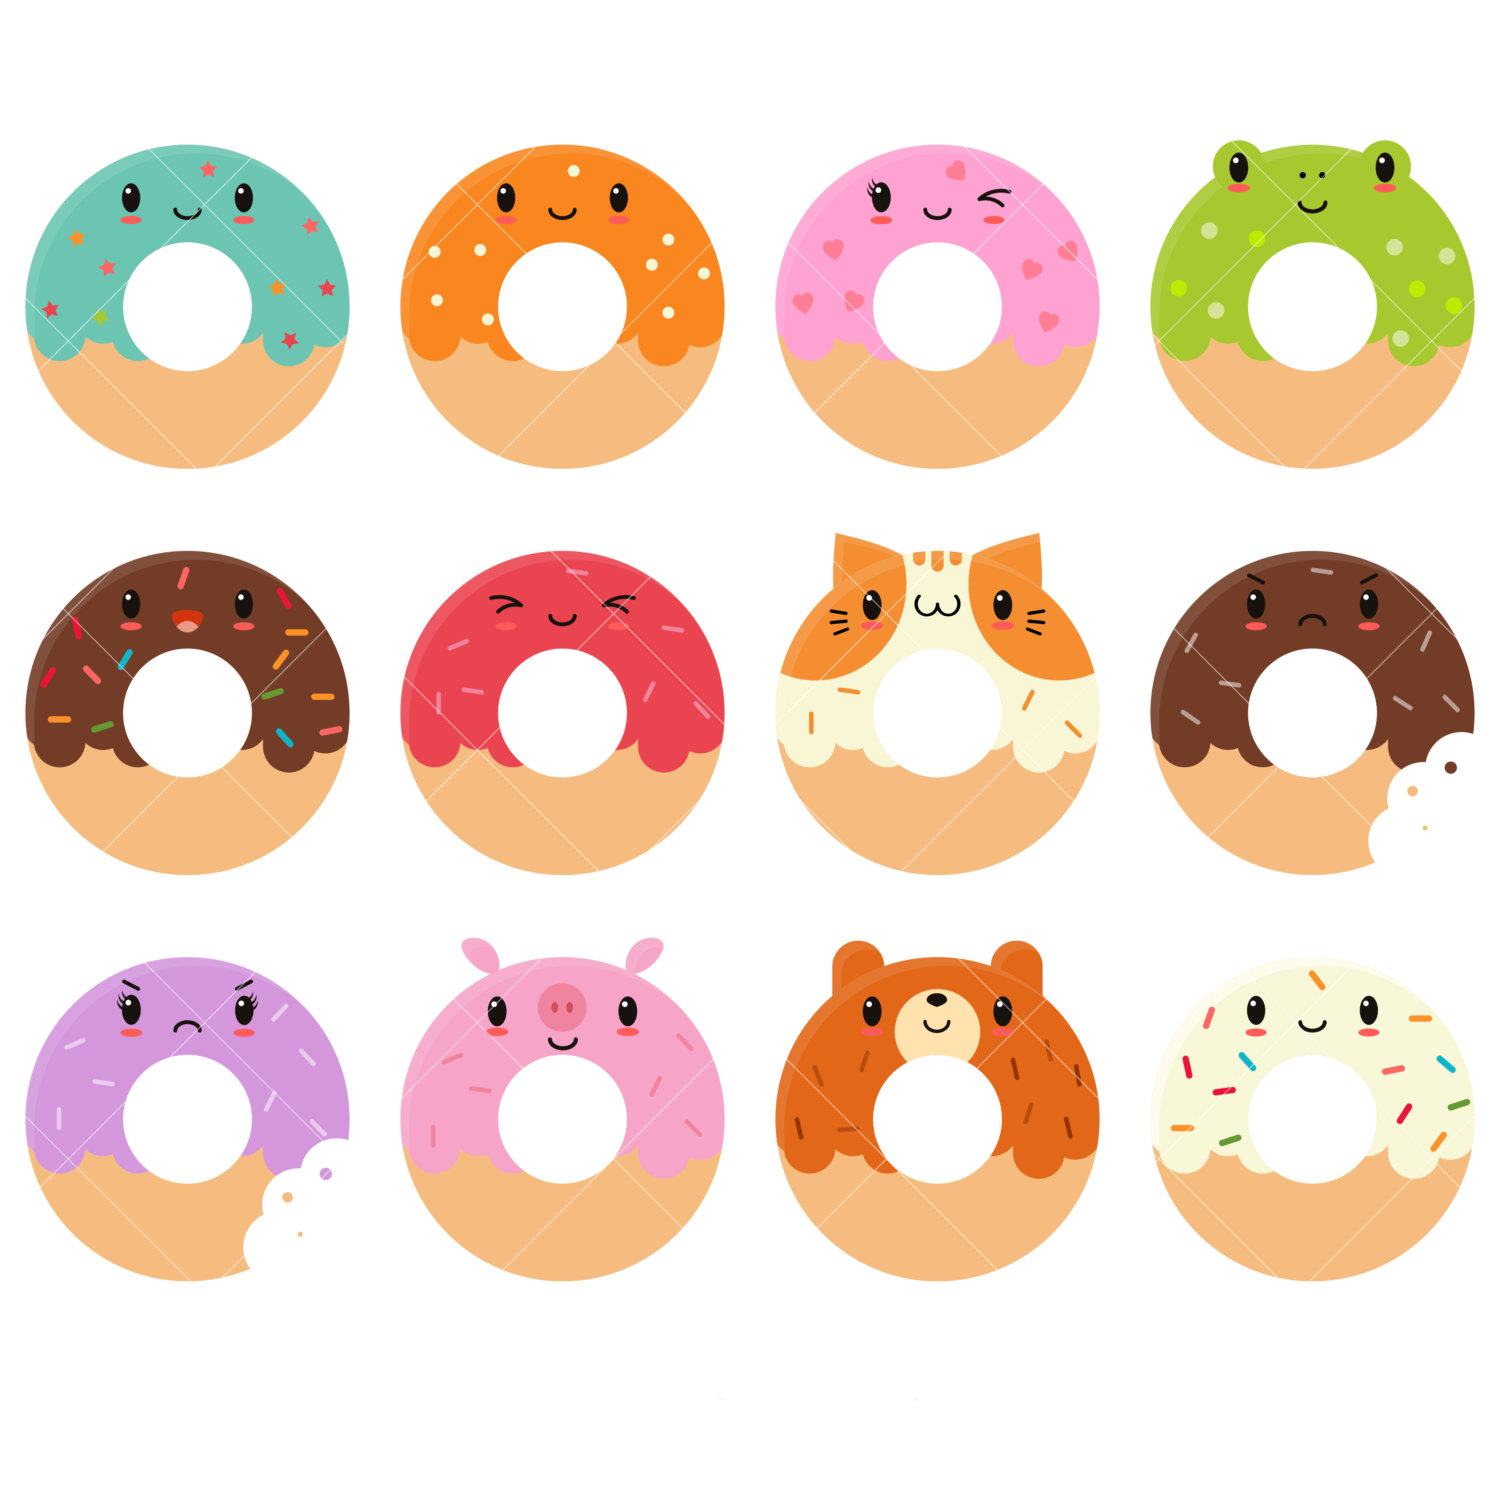 Donuts Clipart Image: Clipart